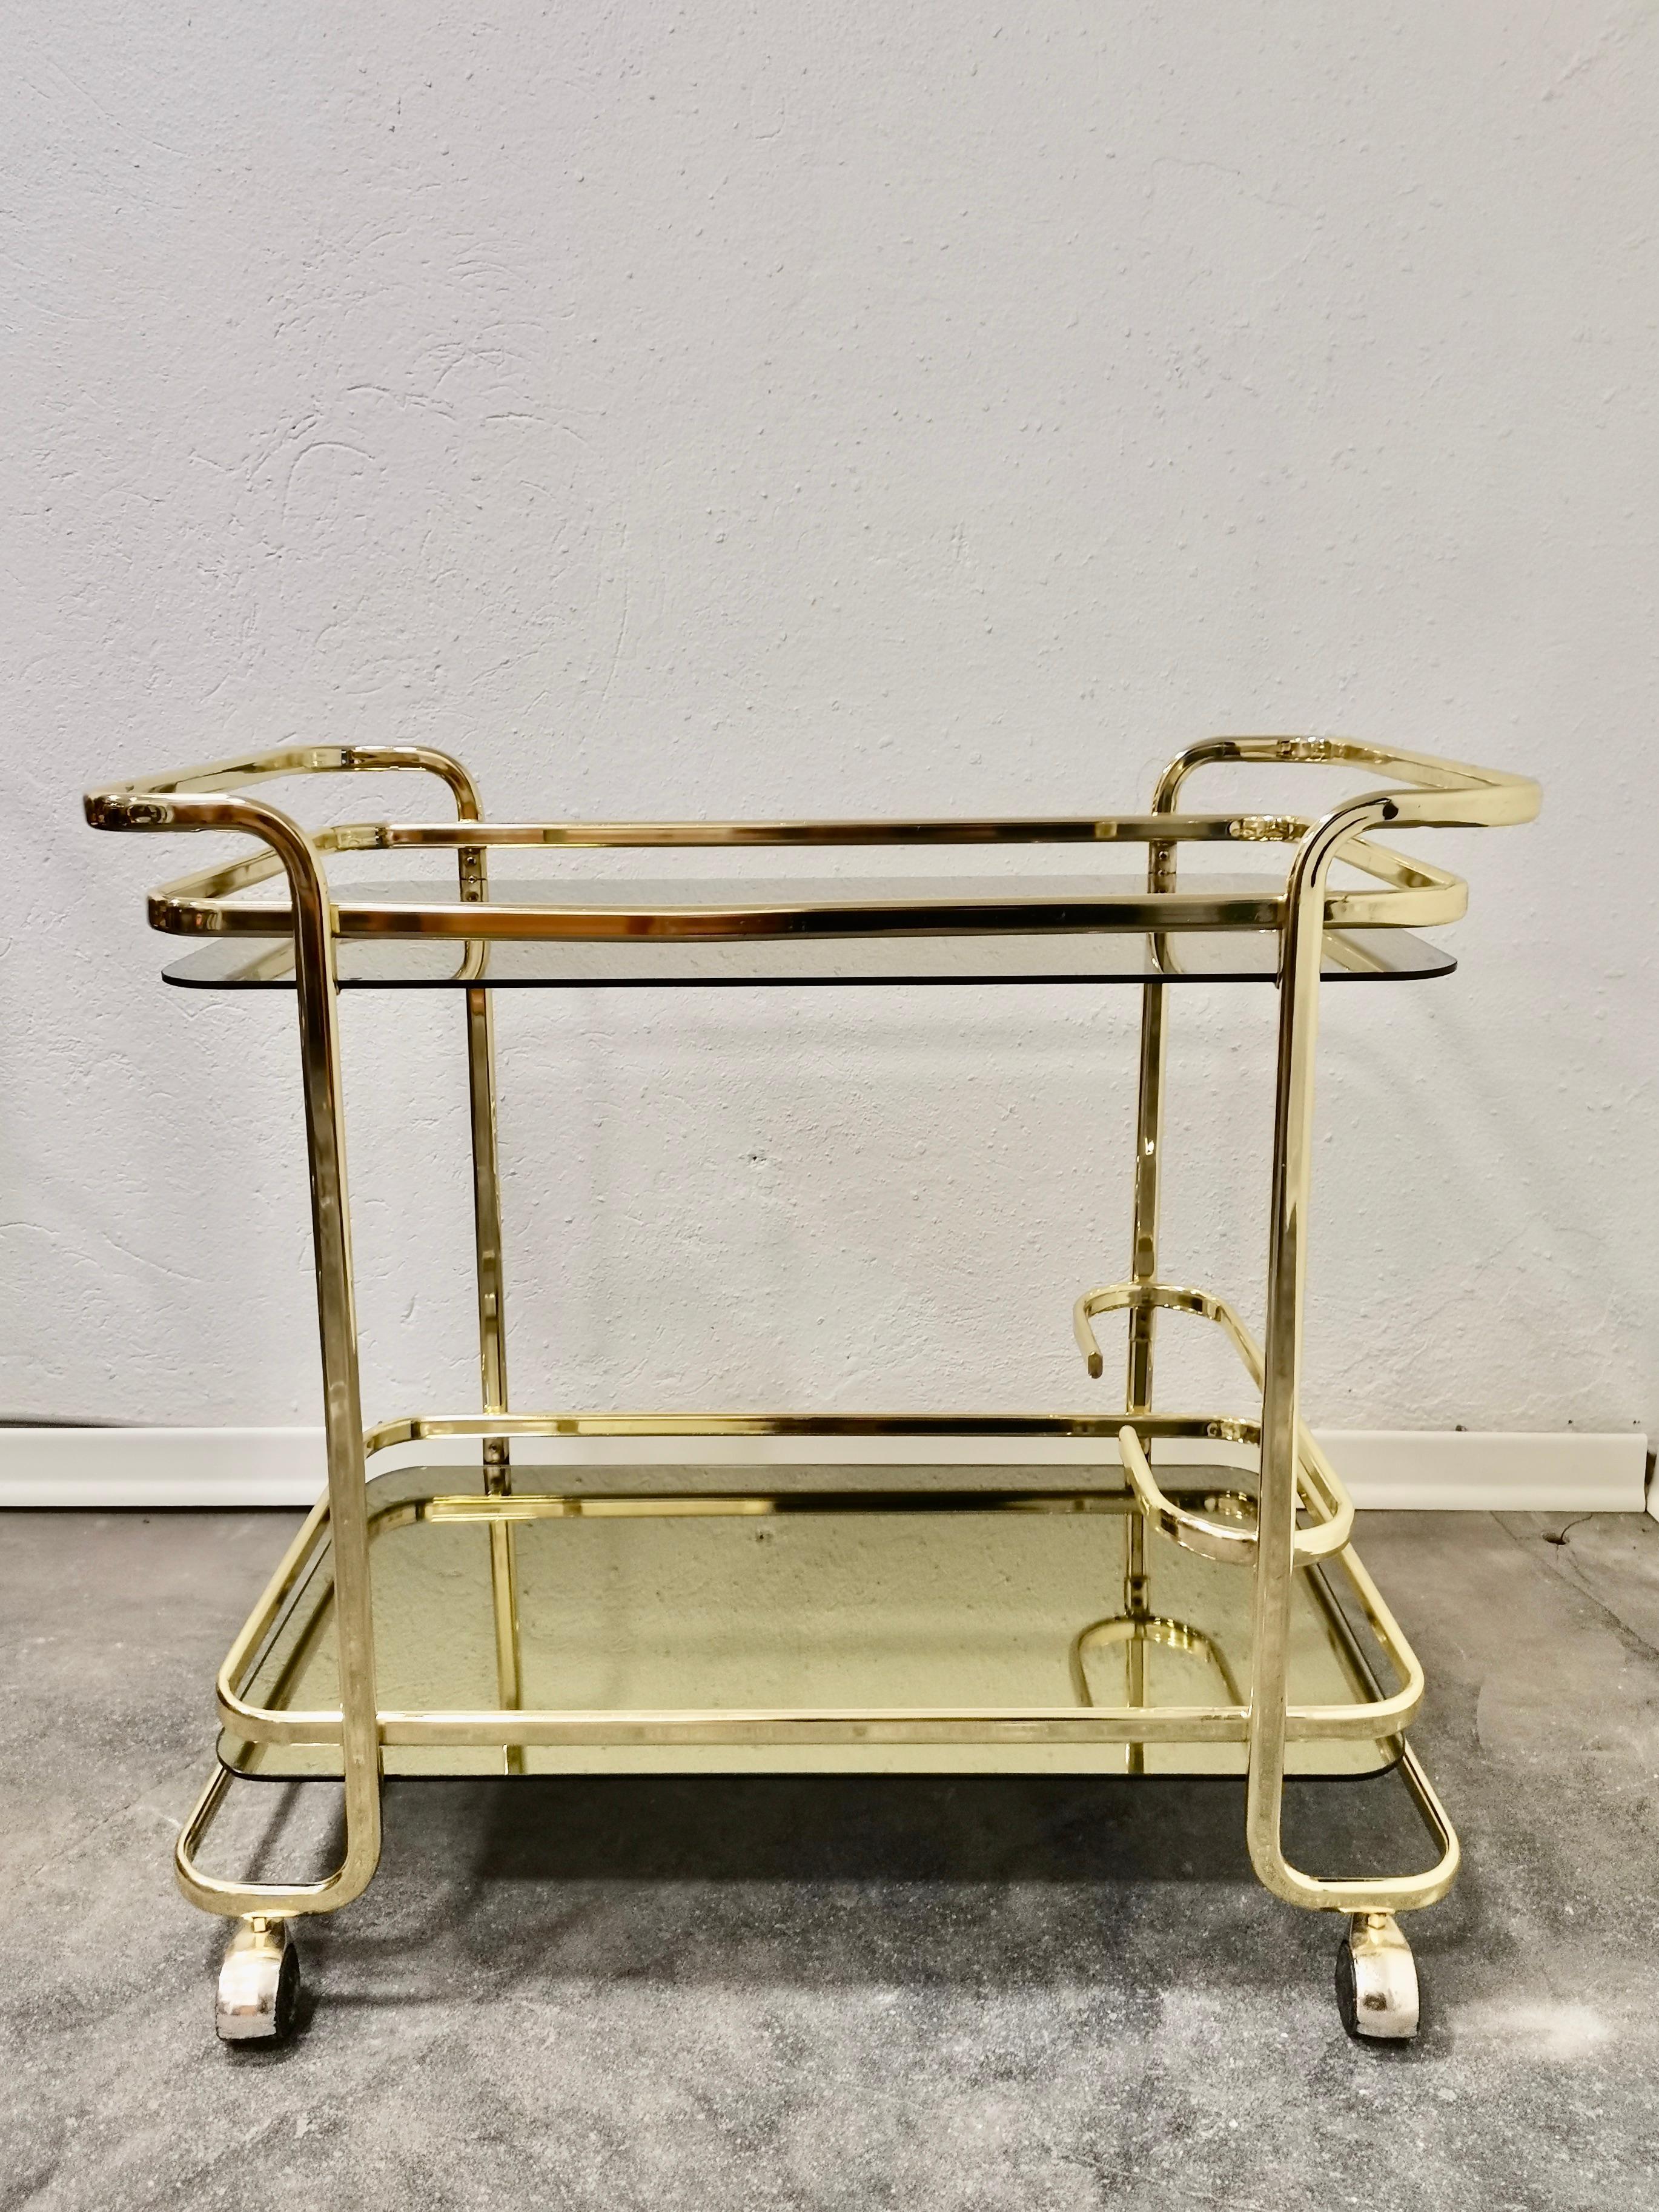 Magnificent Italian brass vintage bar cart. All original parts.The trolley has two shelves, the lower shelf is in golden mirror and the upper shelf is in smoked glass

Period: 1980s

Country of producer: Italy

Style: Hollywood regency Style,